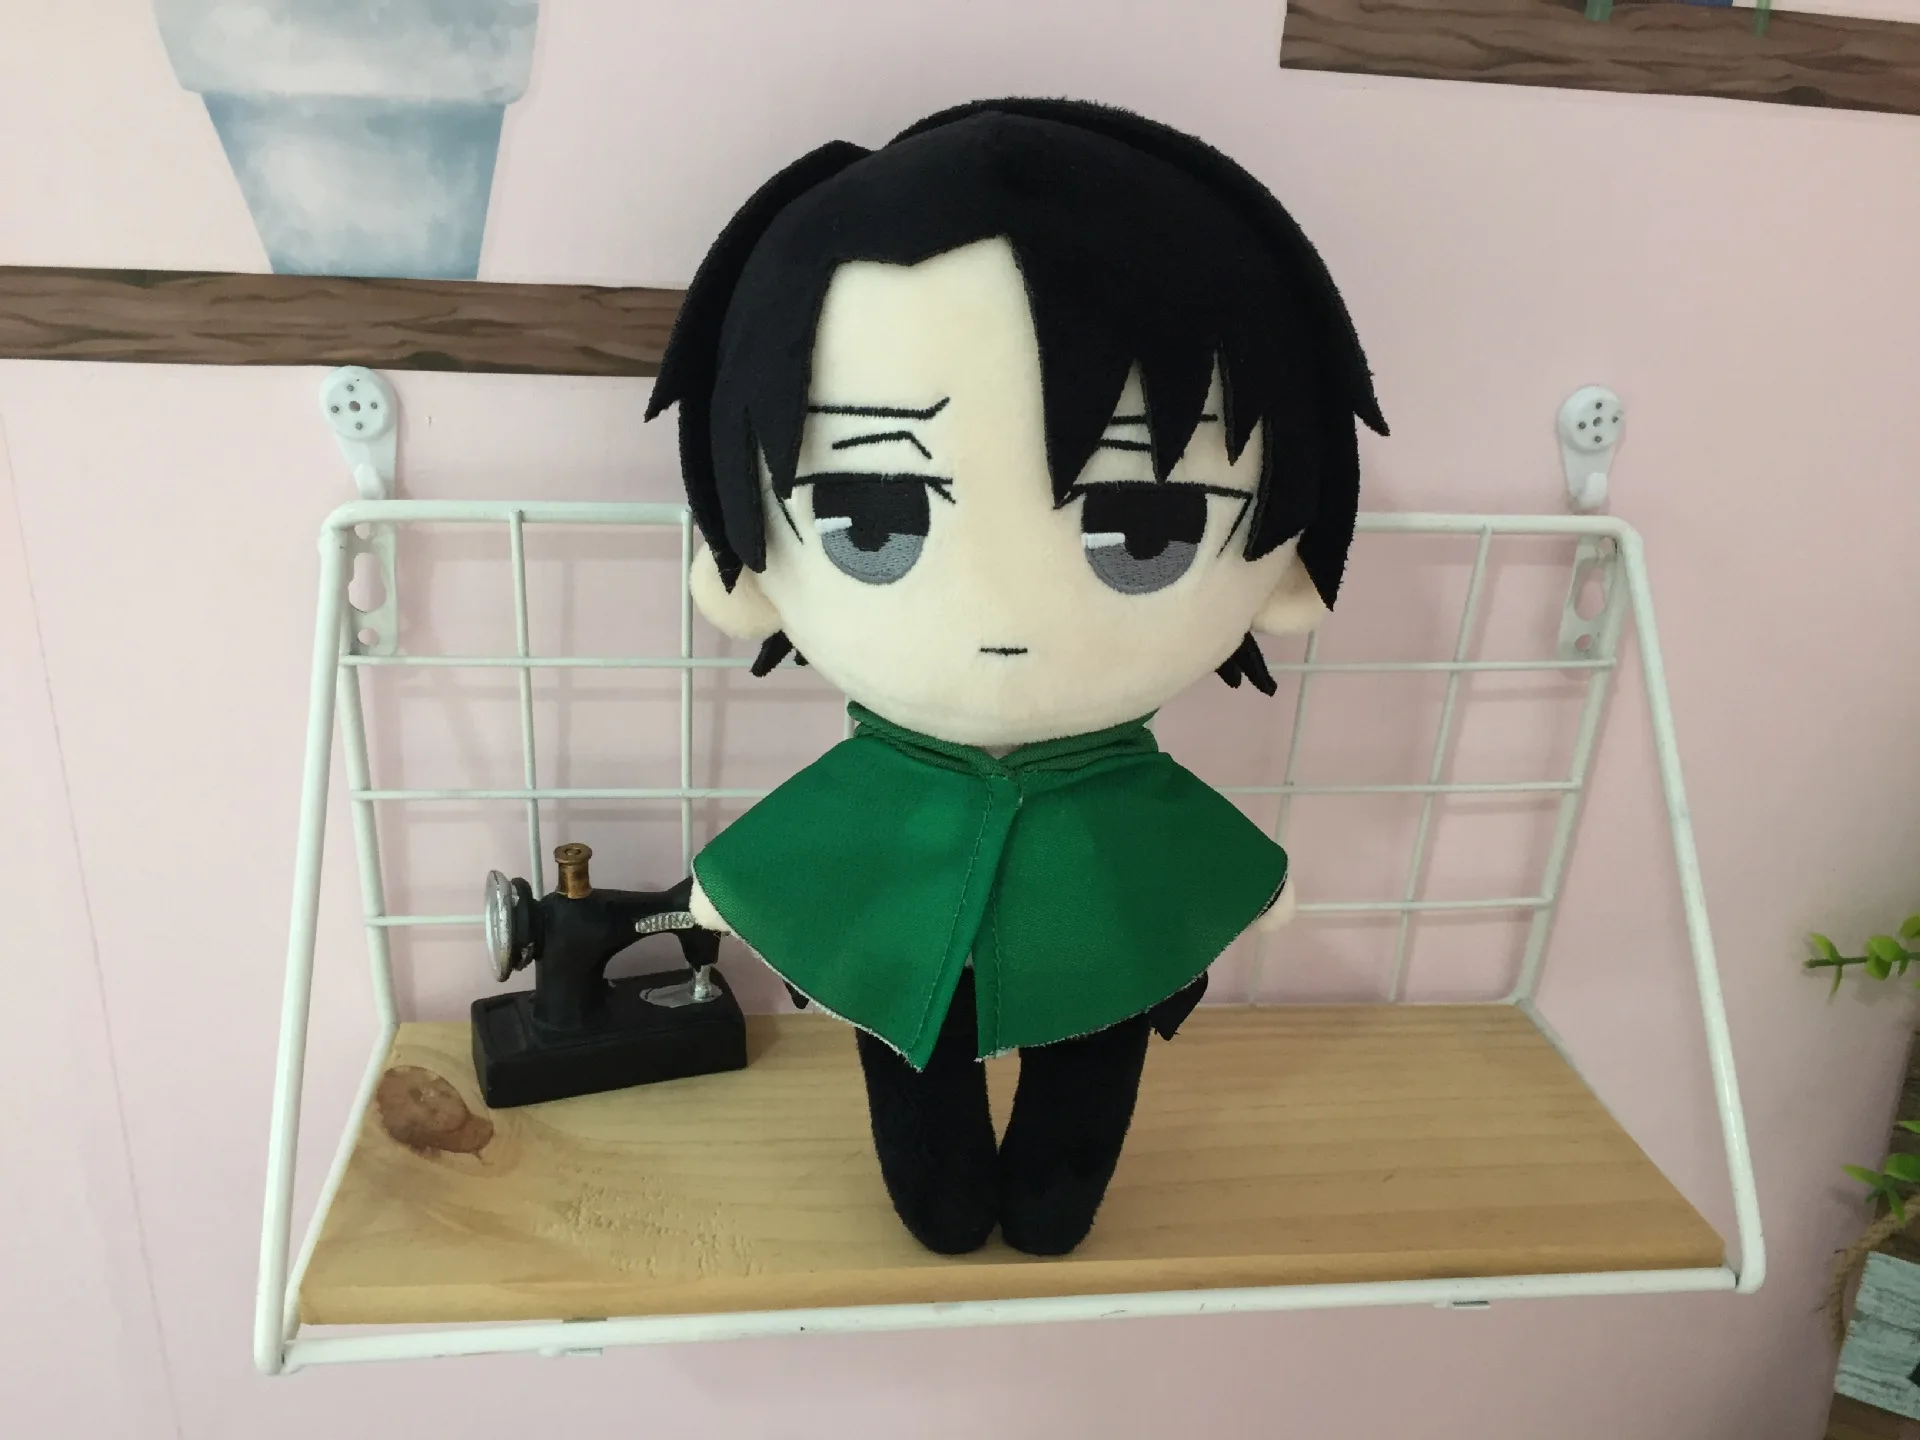 Anime Attack on Titan Levi Ackerman Cute PP Cotton Plush Stuffed Dolls Toy  20cm Pillow Collection Cosplay Birthday Gift - AliExpress Novelty & Special  Use